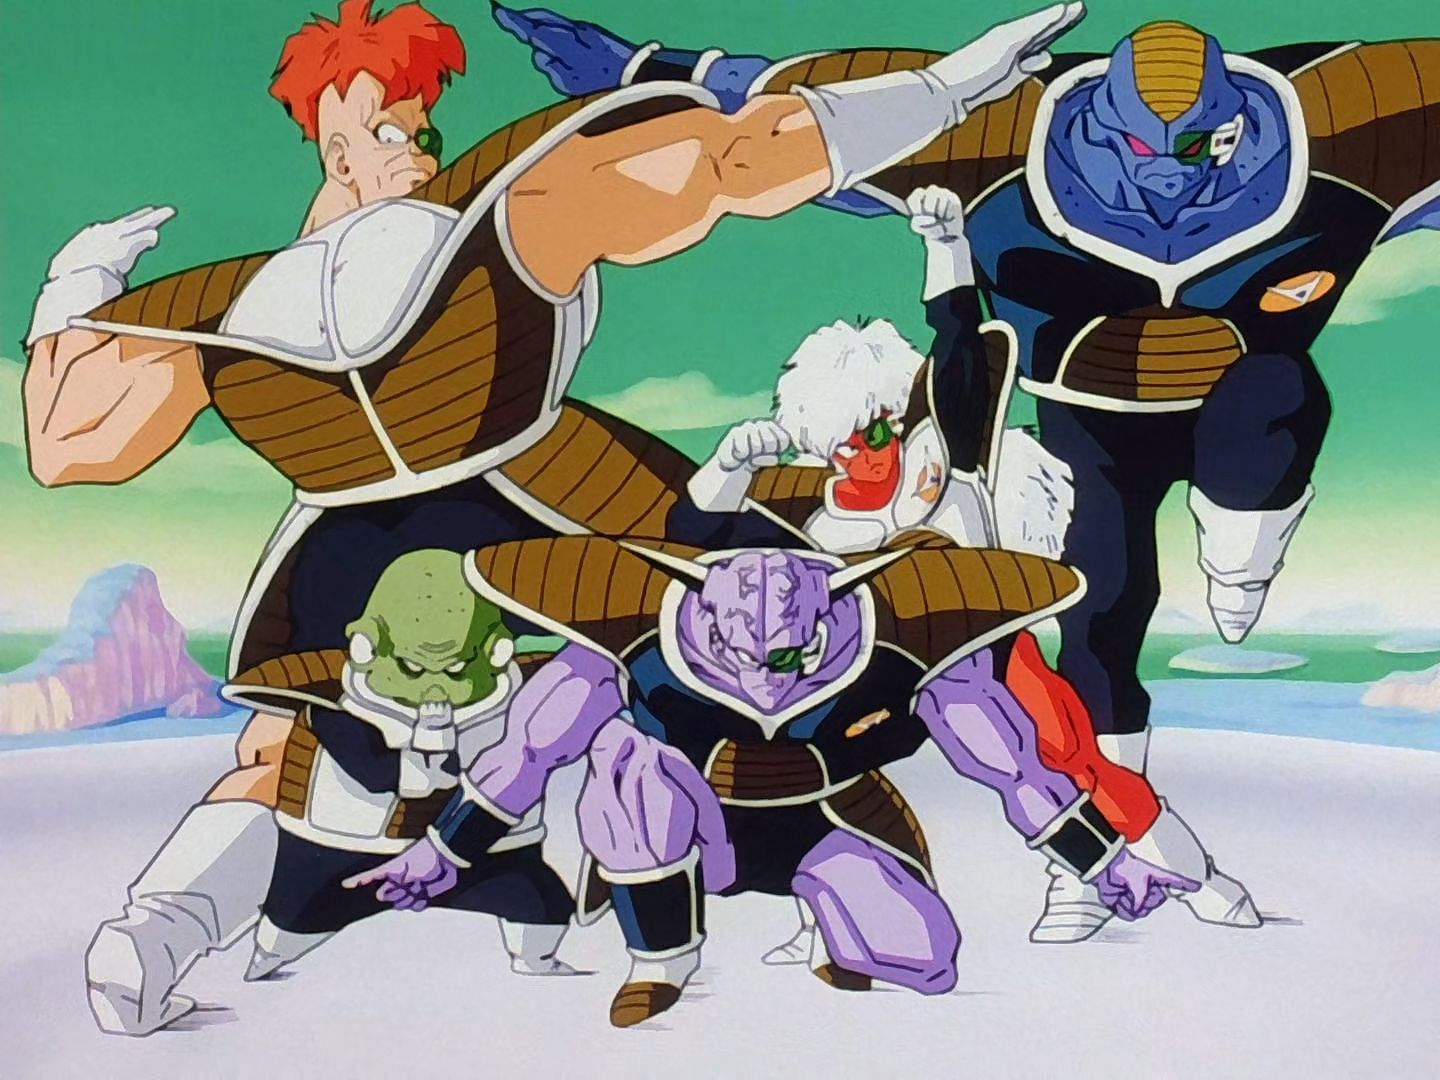 The Ginyu Force doing what they do best: posing! (Image via Toei Animation)